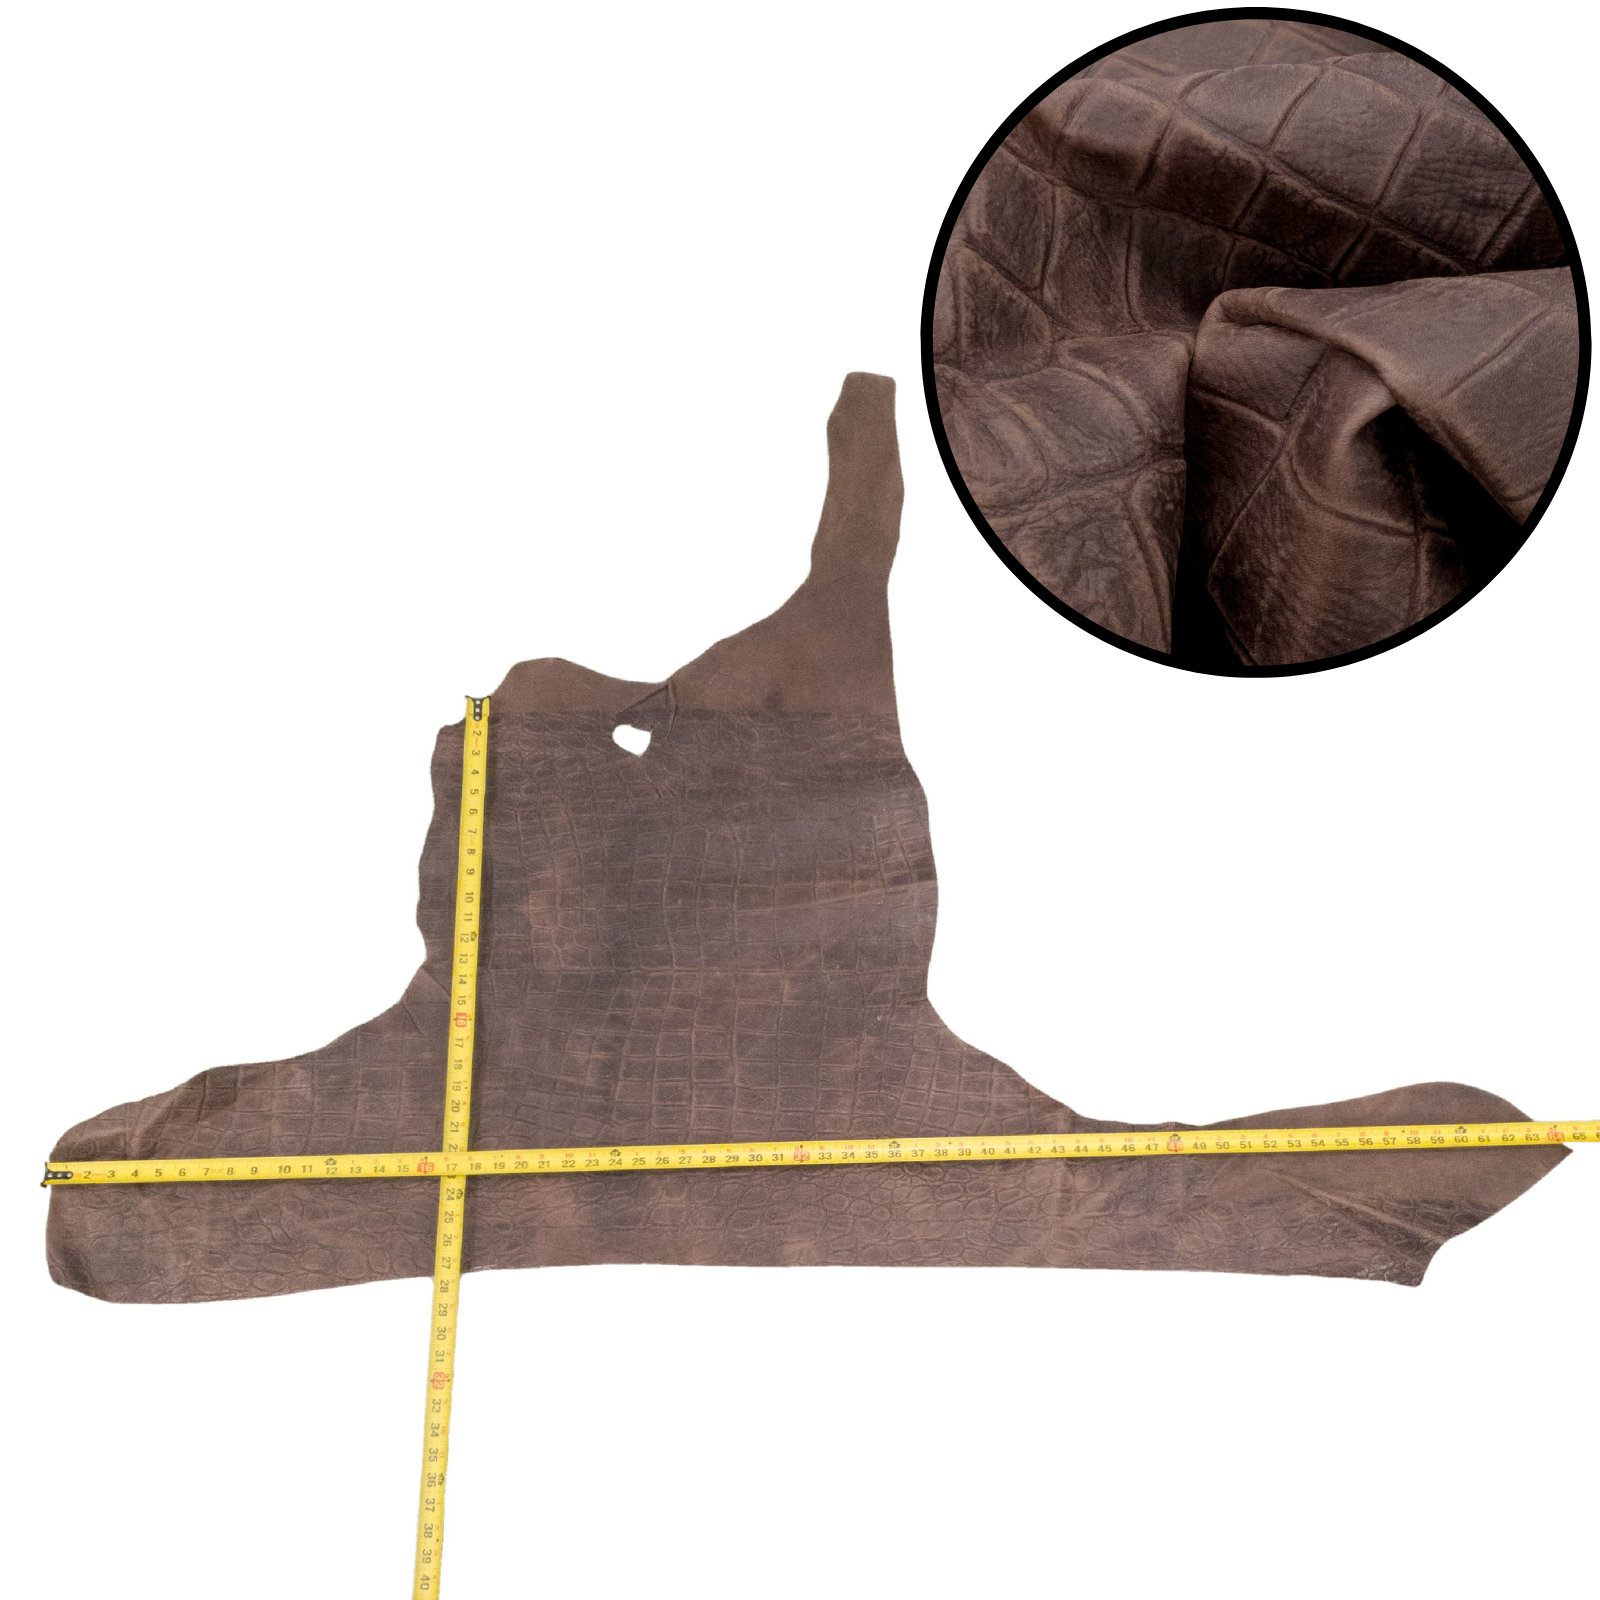 Embossed, 4-21 Sq Ft Upholstery Cowhide Project Pieces, Cinnamon Soot / 6 / 1 | The Leather Guy